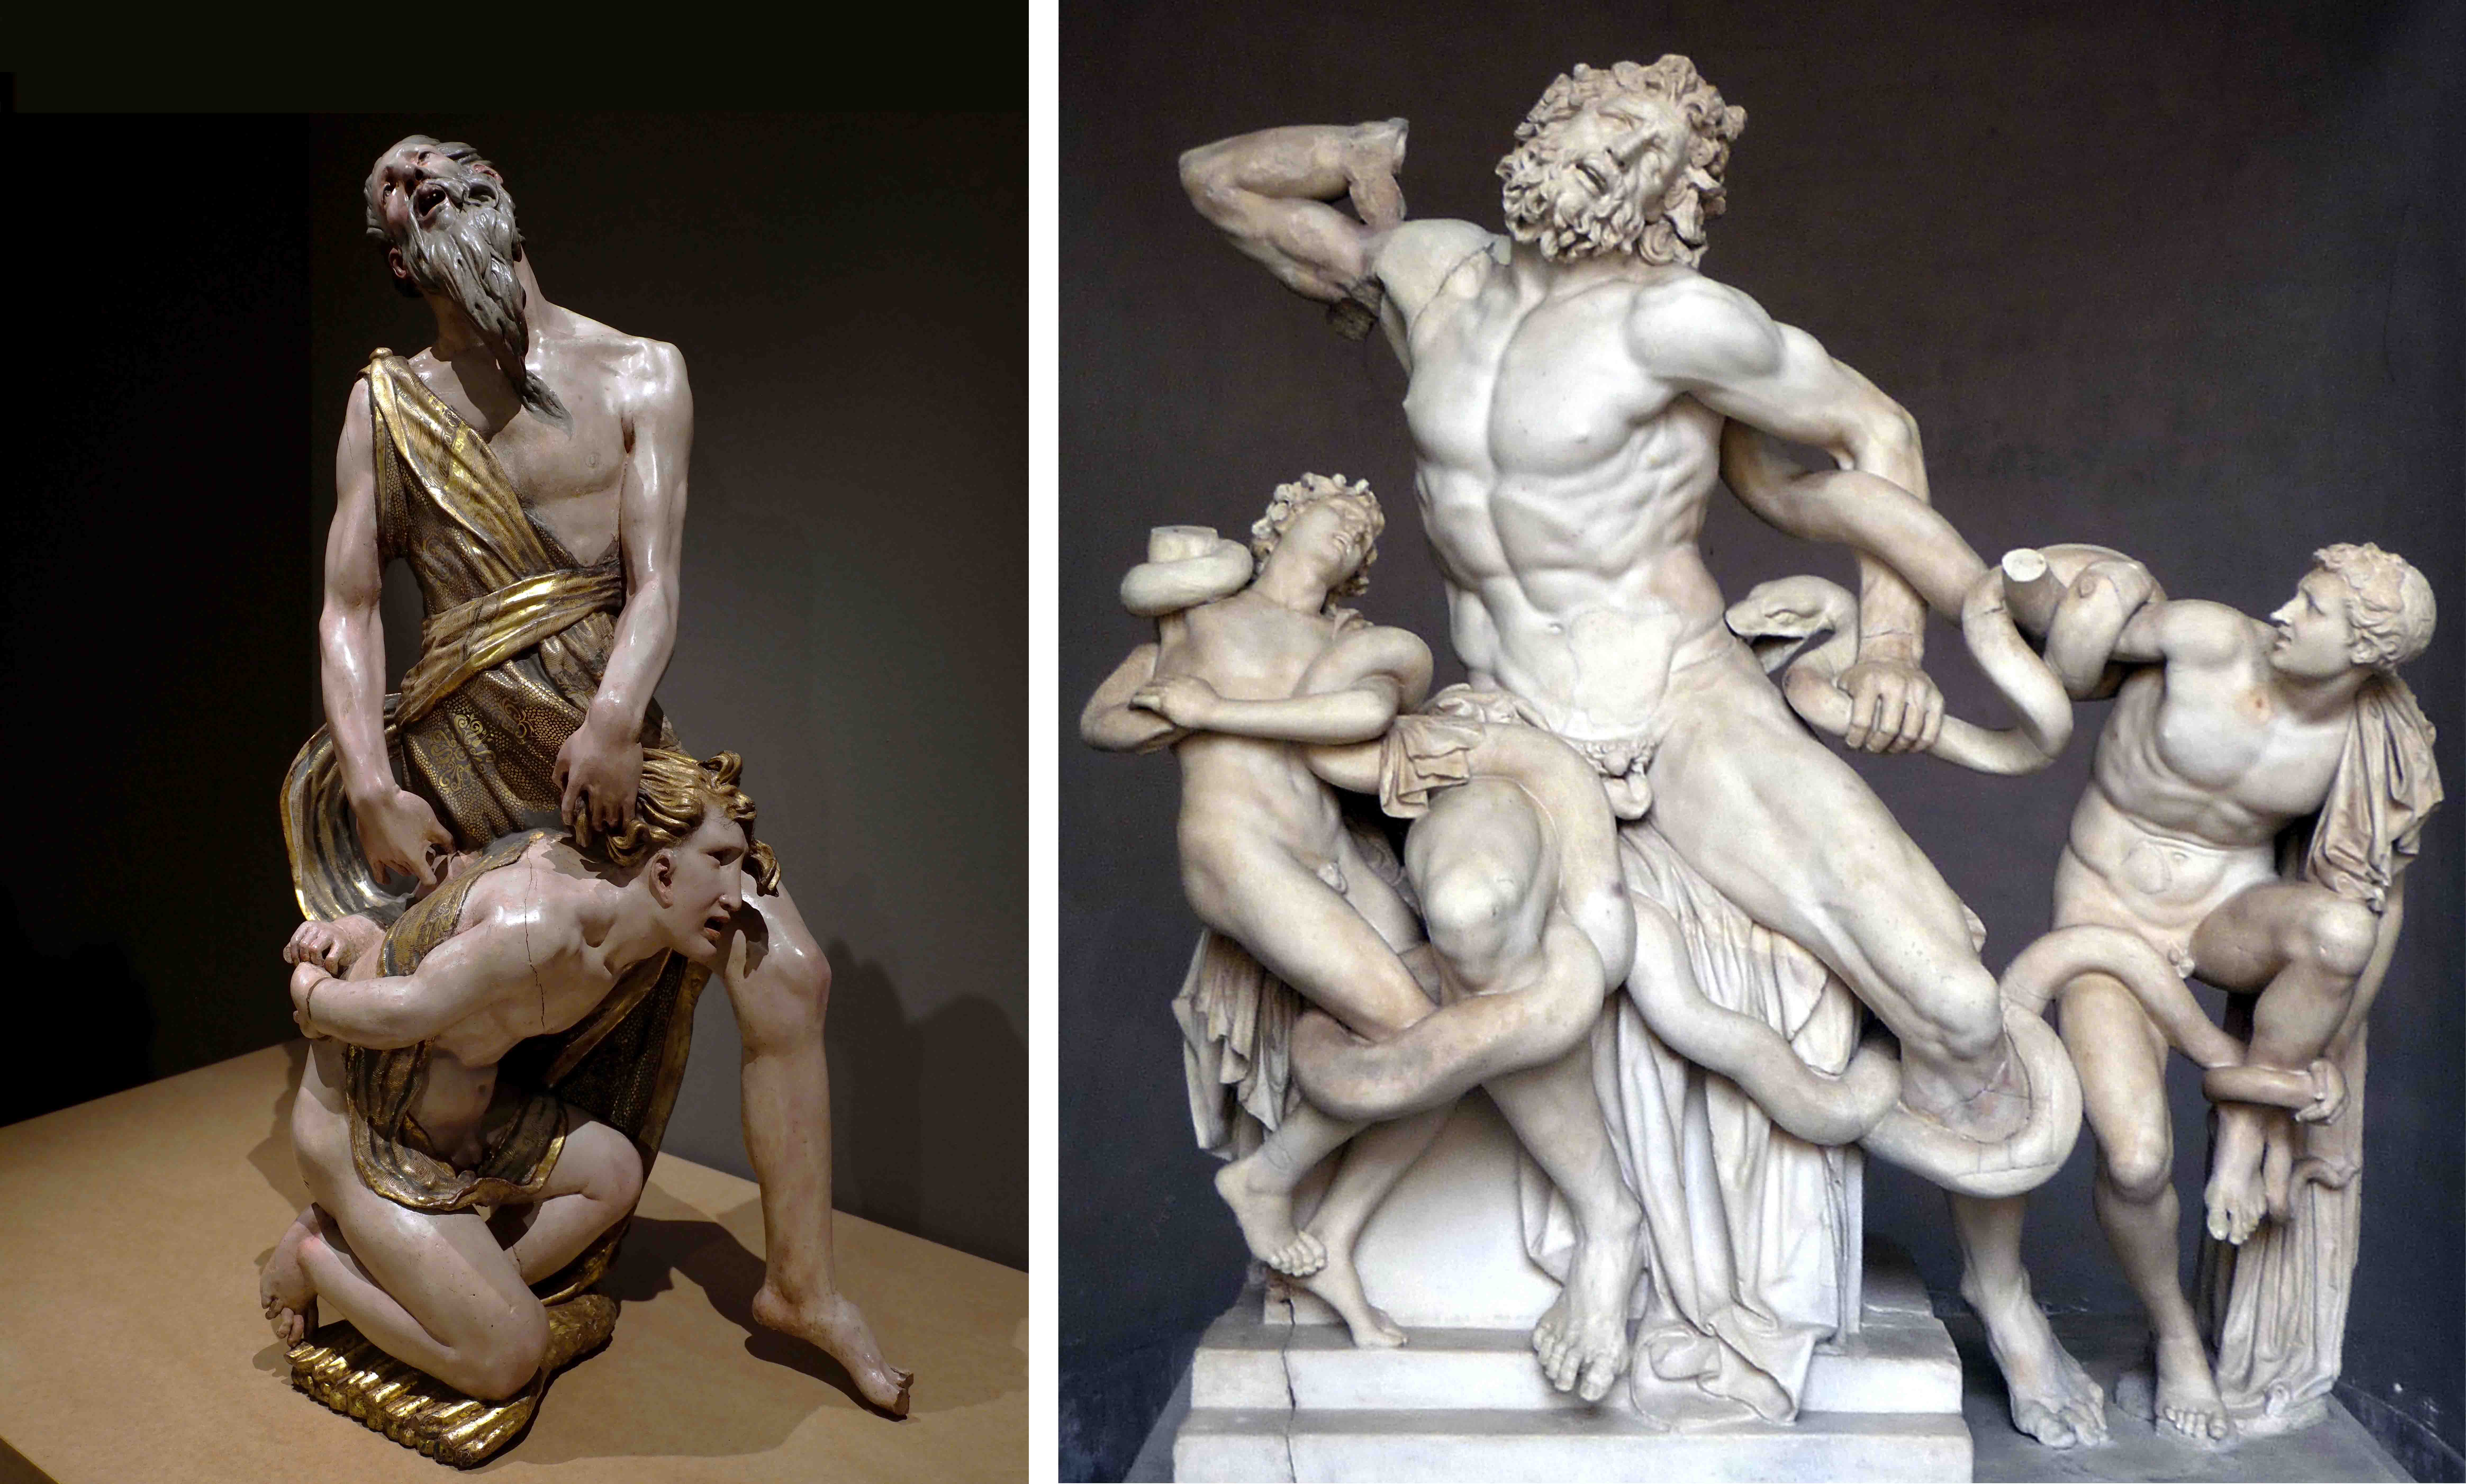 Left: Alonso Berruguete, Abraham and Isaac, 1526–1532, polychromed wood, (89 x 46 x 32 cm) (Museo Nacional de Escultura, Valladolid; photo: Iglesia en Valladolid, CC BY-SA 2.0); right: Athanadoros, Hagesandros, and Polydoros of Rhodes, Laocoön and his Sons, early first century C.E., marble, 7’10 1/2″ high (Vatican Museums' photo: Steven Zucker, CC BY-NC-SA 2.0)